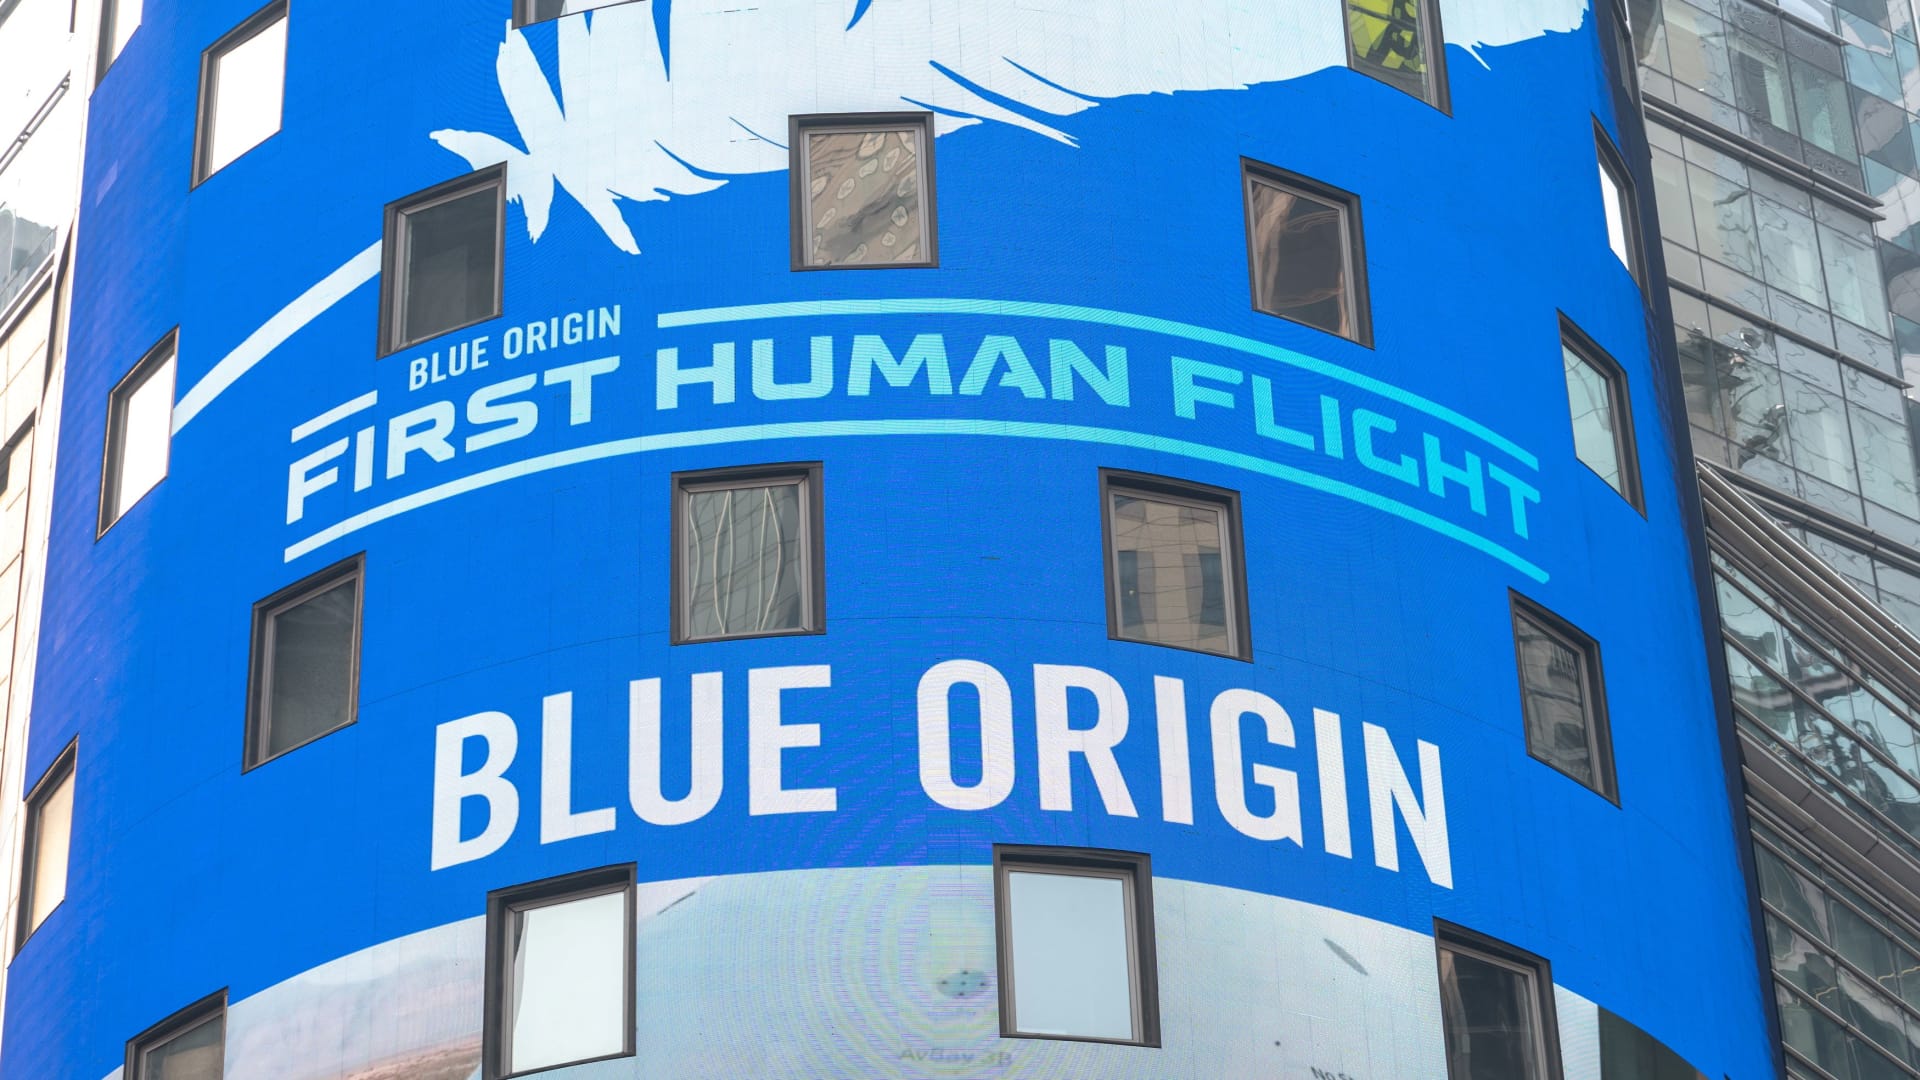 Blue Origin signage is displayed on a screen before the launch of billionaire American businessman Jeff Bezos and his three crewmates on Blue Origin's inaugural flight to the edge of space, in Times Square in New York City, U.S., July 20, 2021.